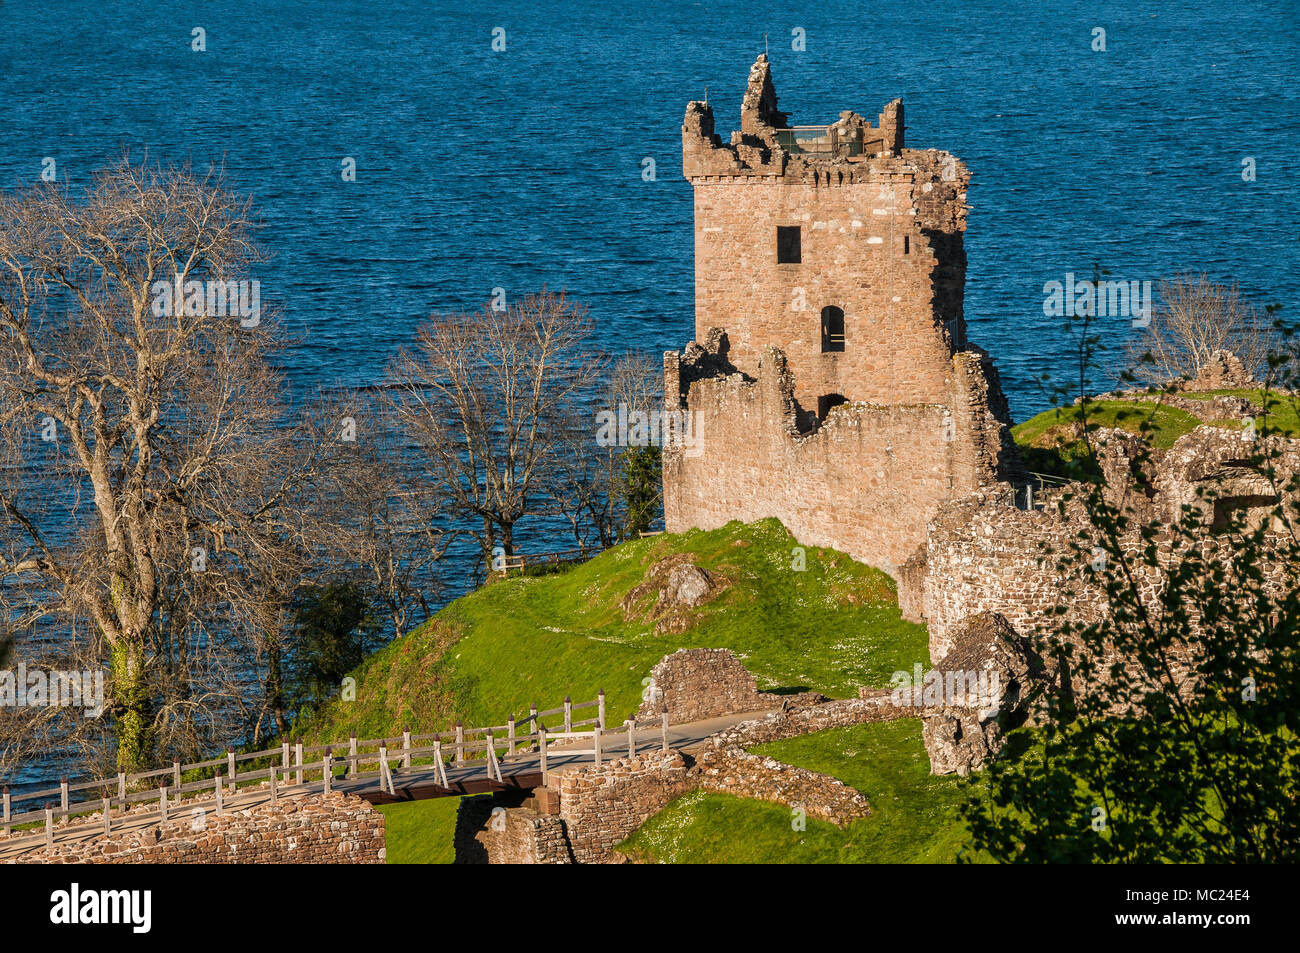 Urquhart Castle sits beside Loch Ness in the Highlands of Scotland overlooking the Urquhart Bay on the Loch. Stock Photo